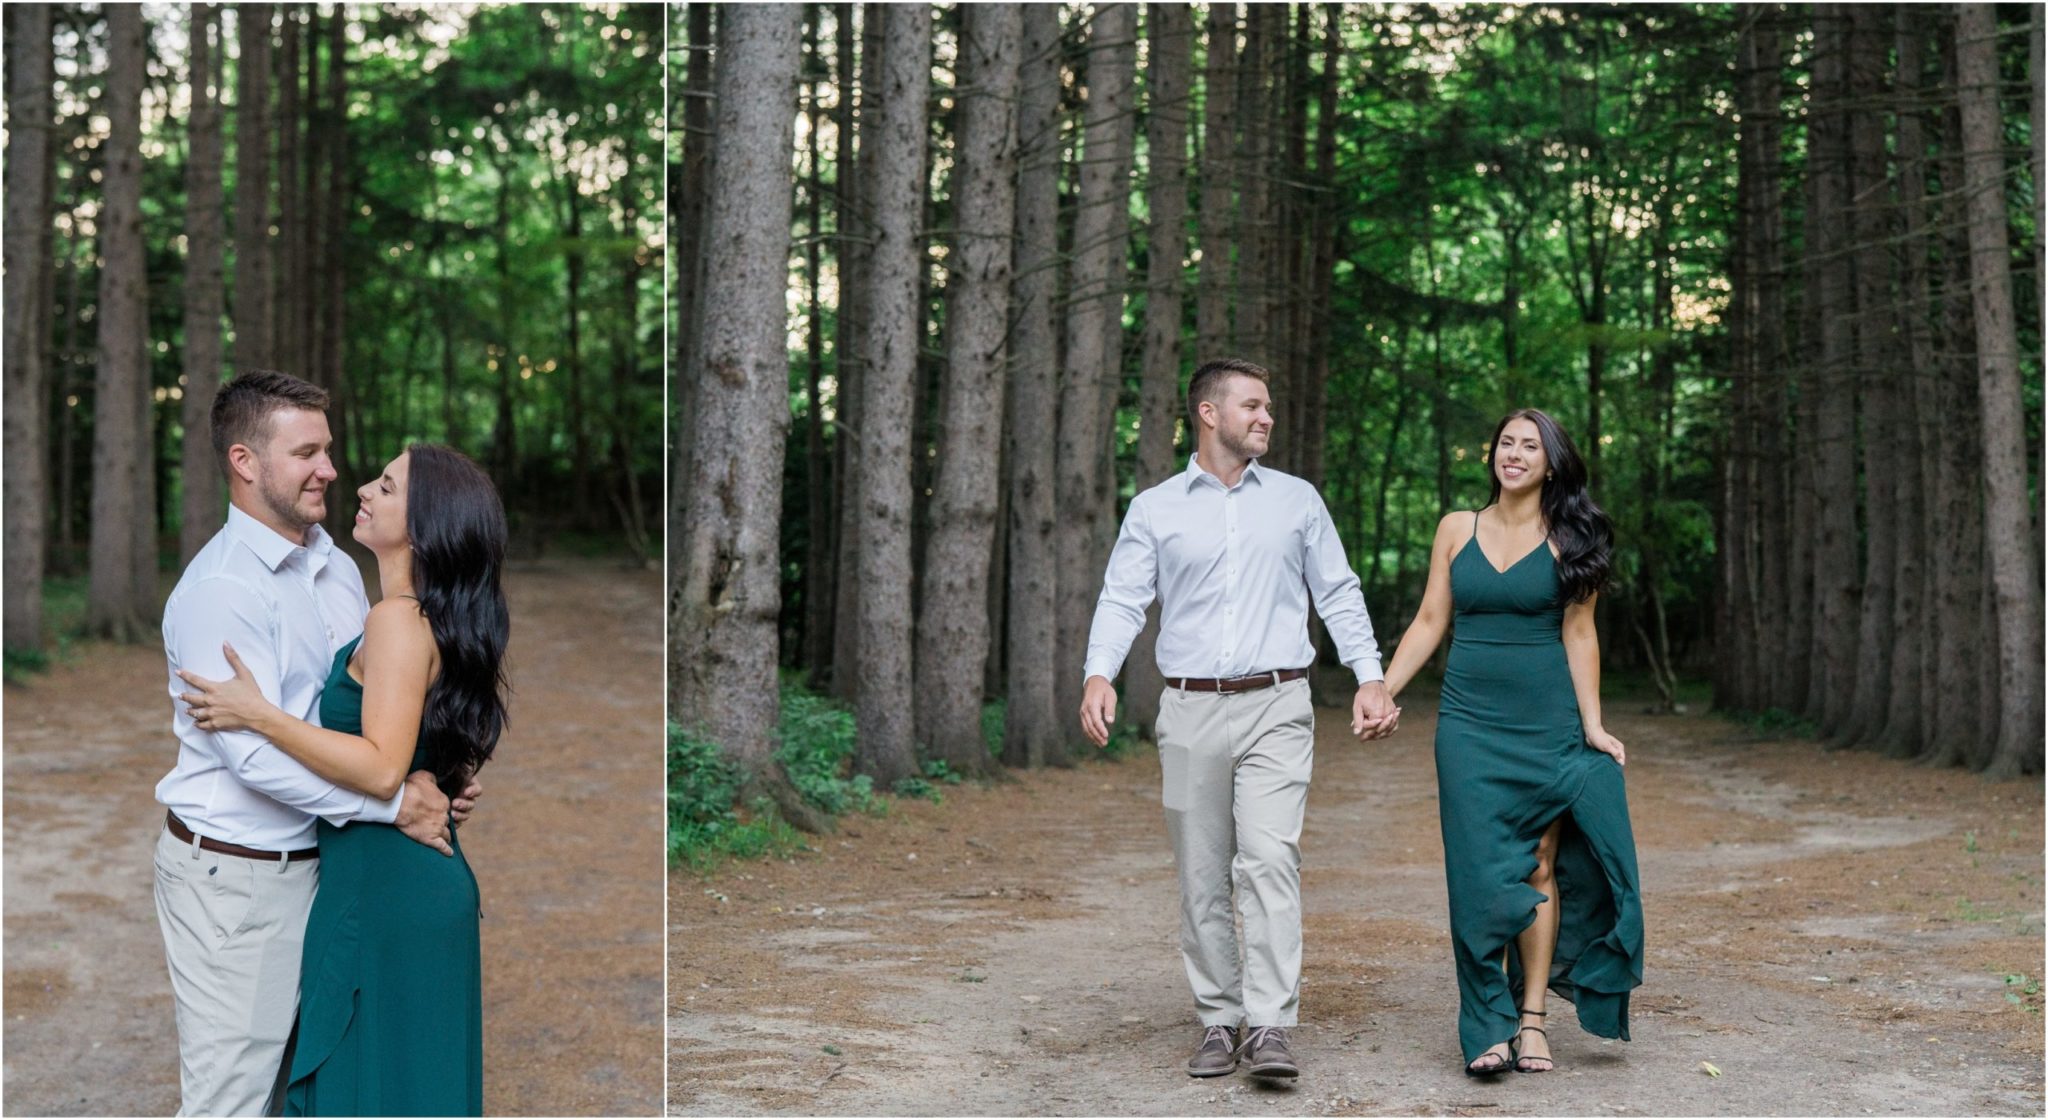 a collaged image of an engaged couple embracing and walking during their engagement photo session